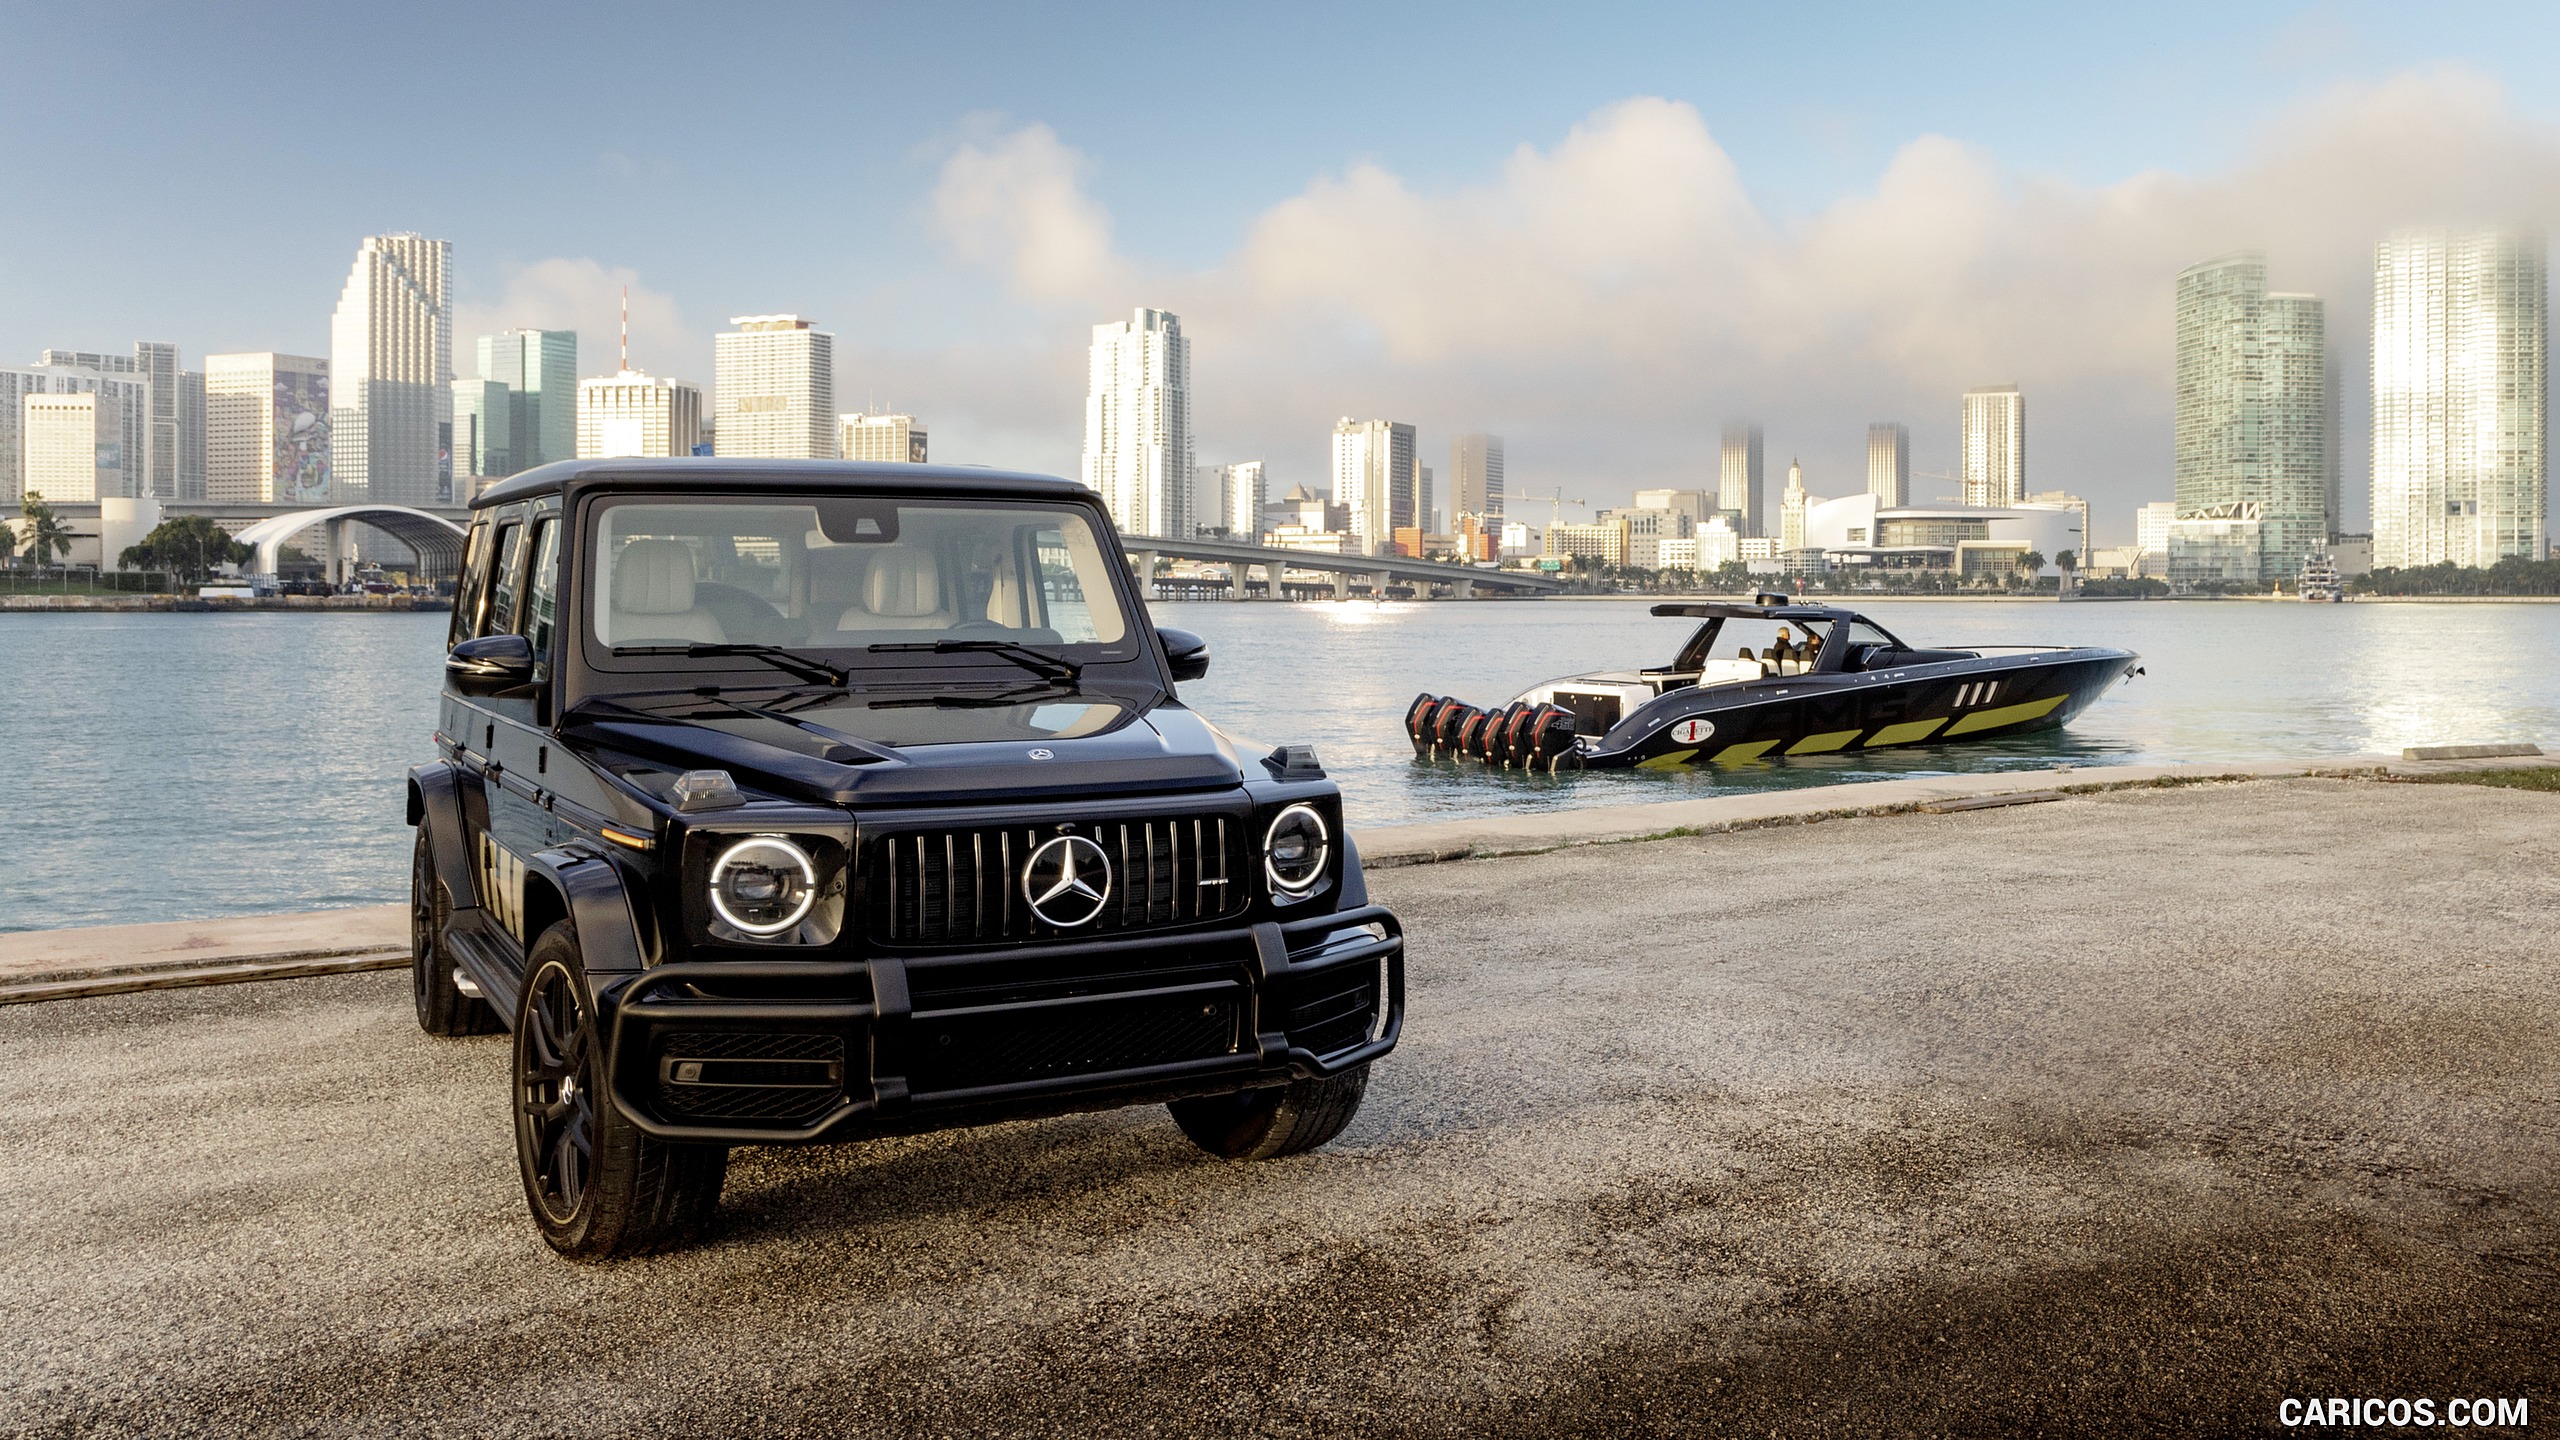 2020 Mercedes-AMG G 63 Cigarette Edition - Front Three-Quarter, #4 of 14